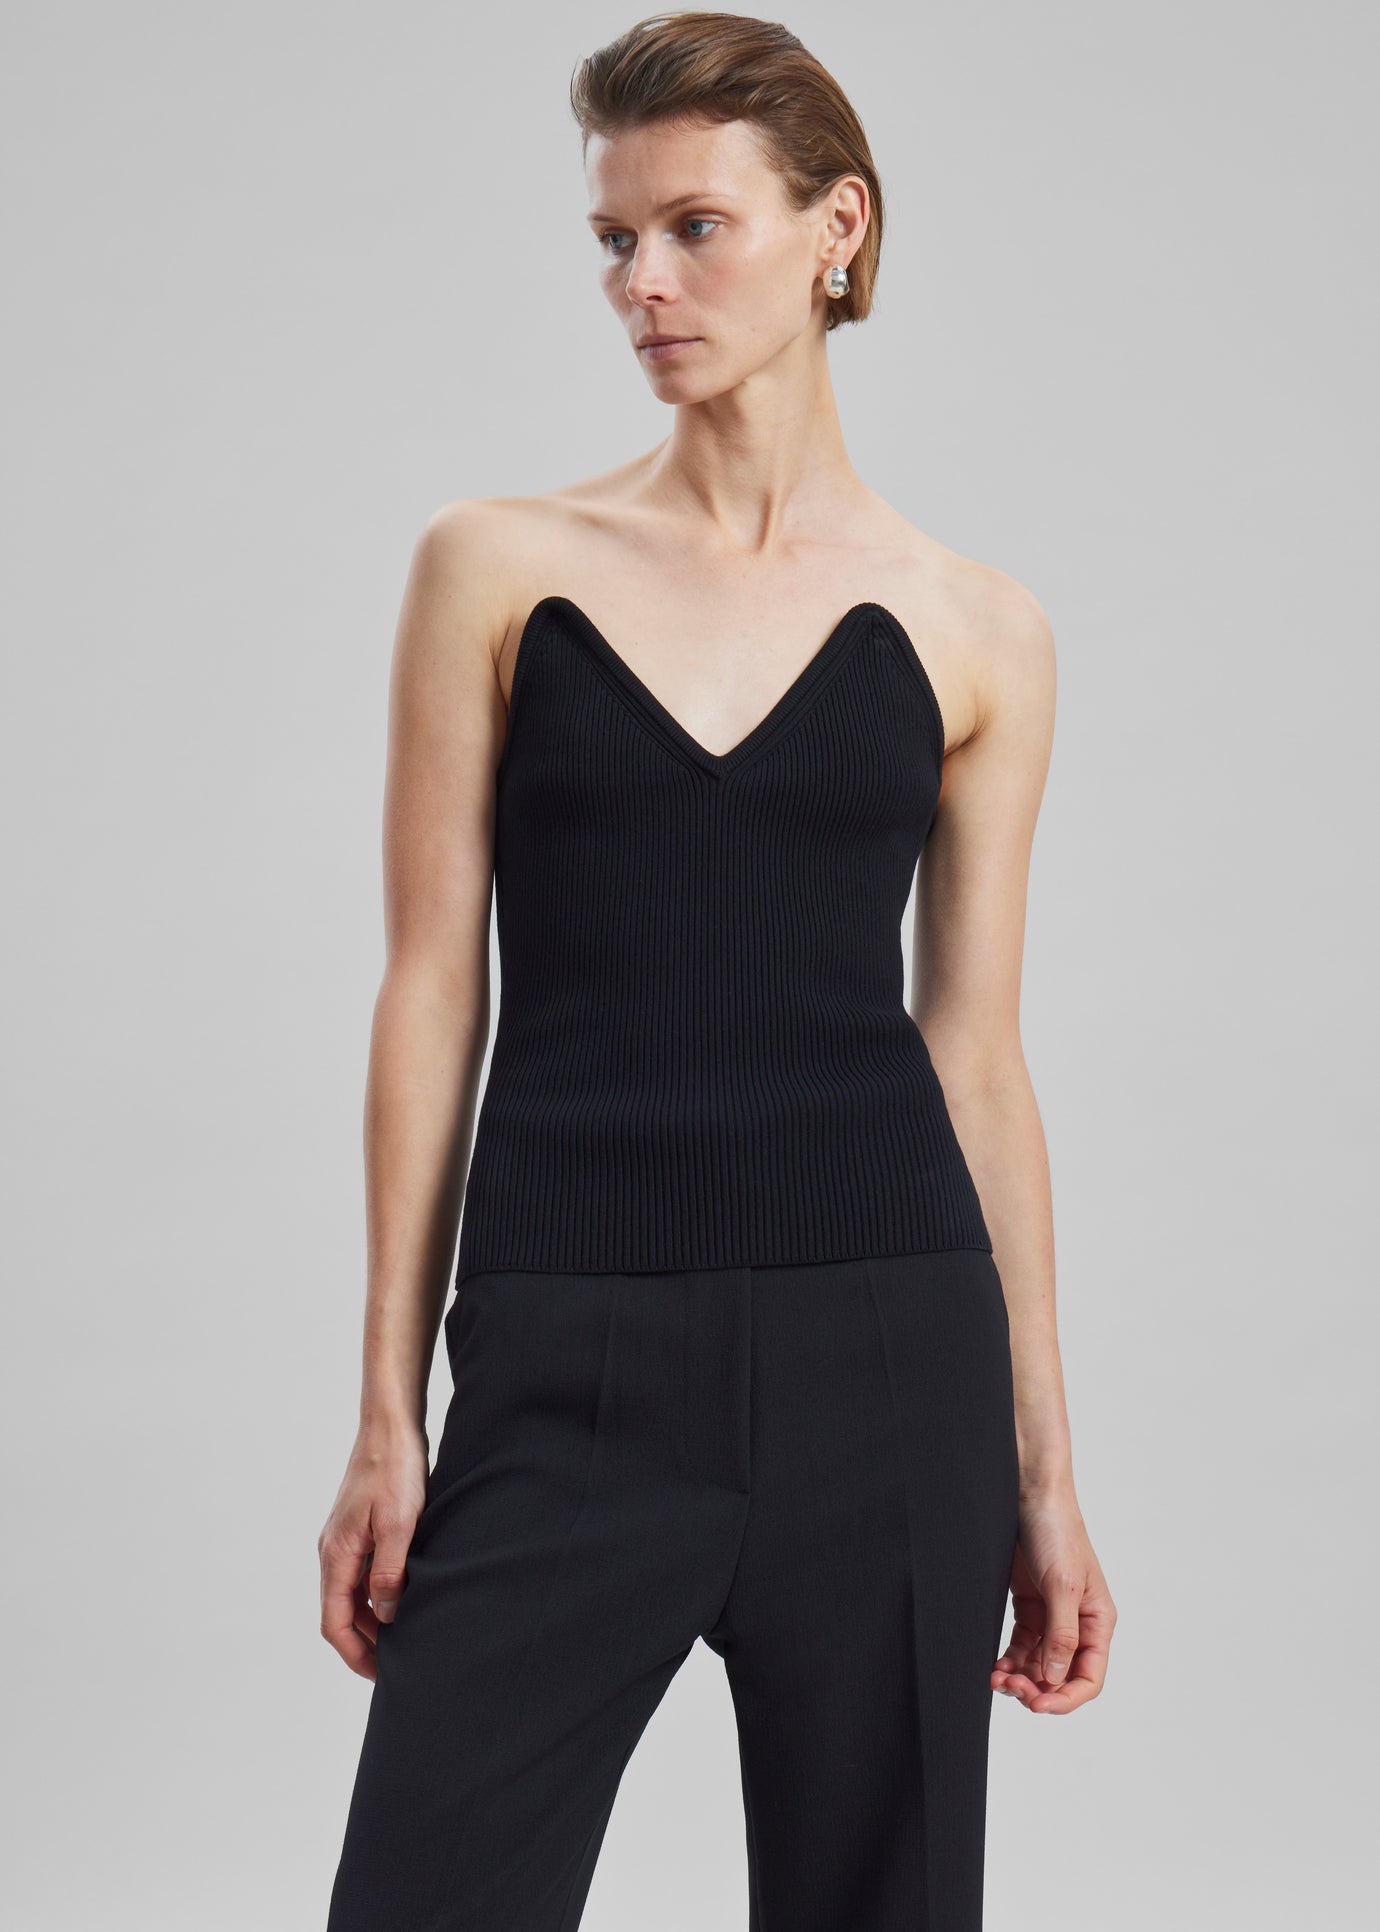 Coperni Knitted Bustier Top - Black